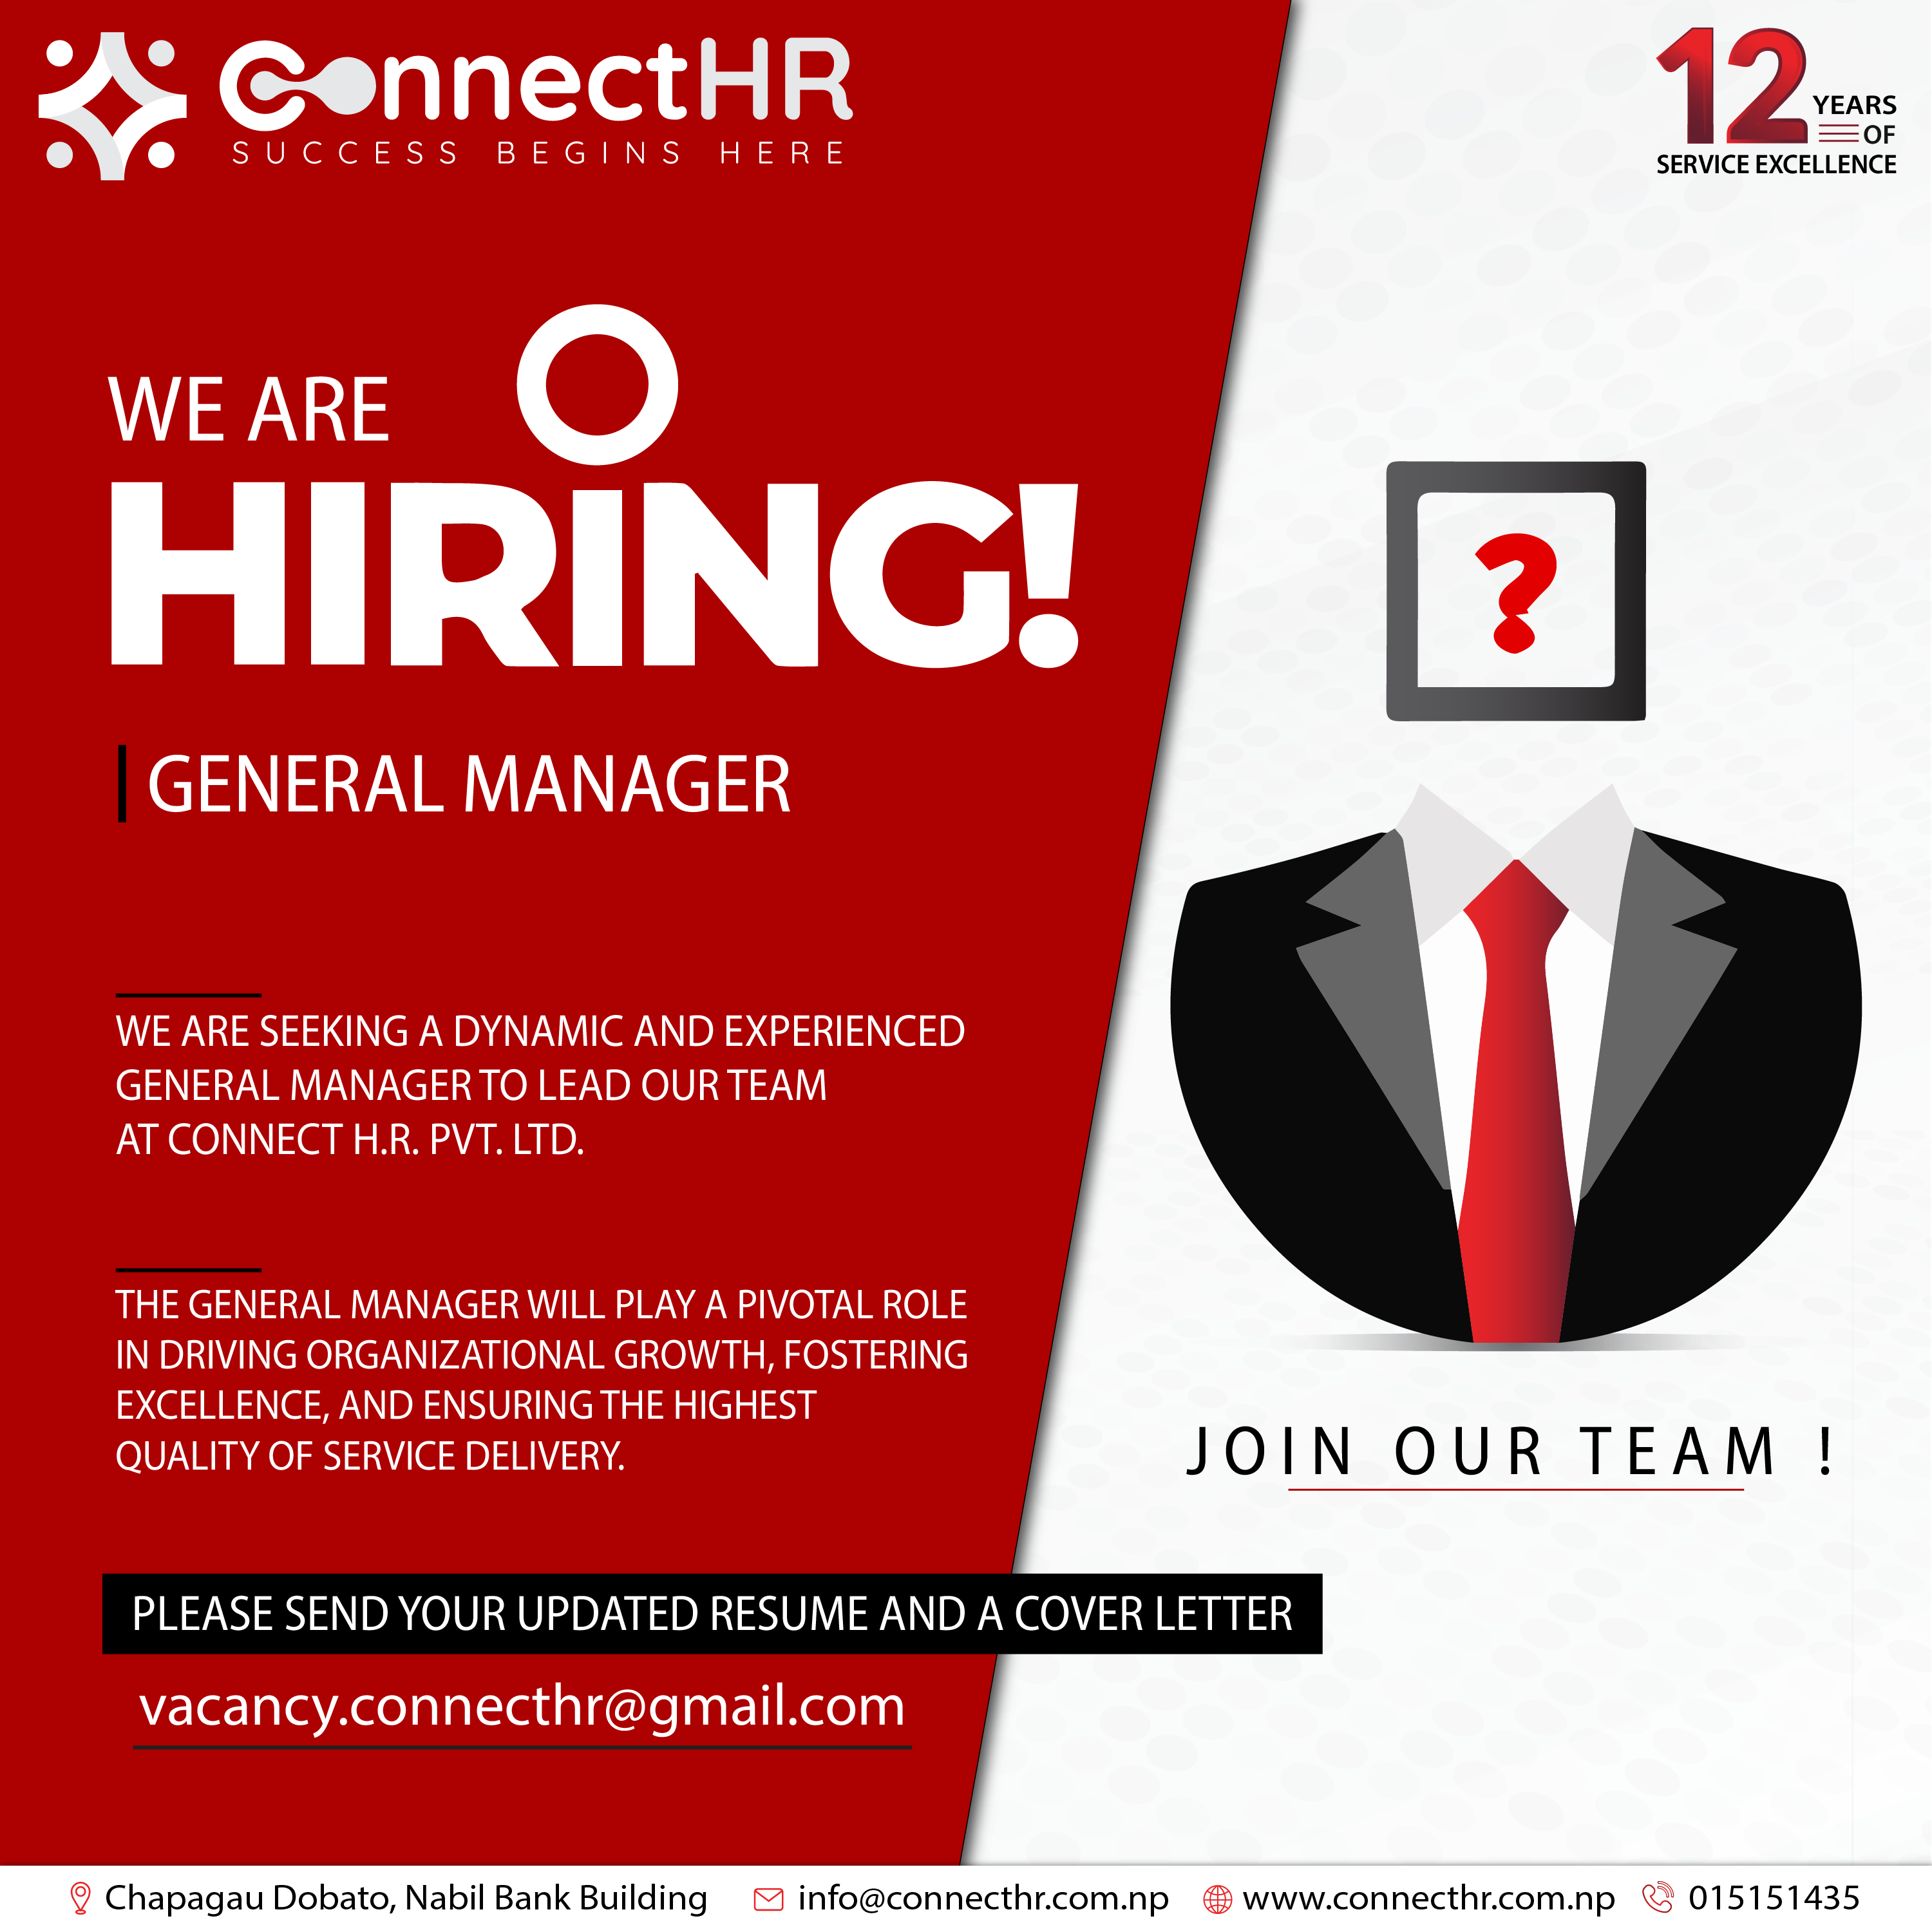 Vacancy for General Manager at Connect H.R. Pvt. Ltd.